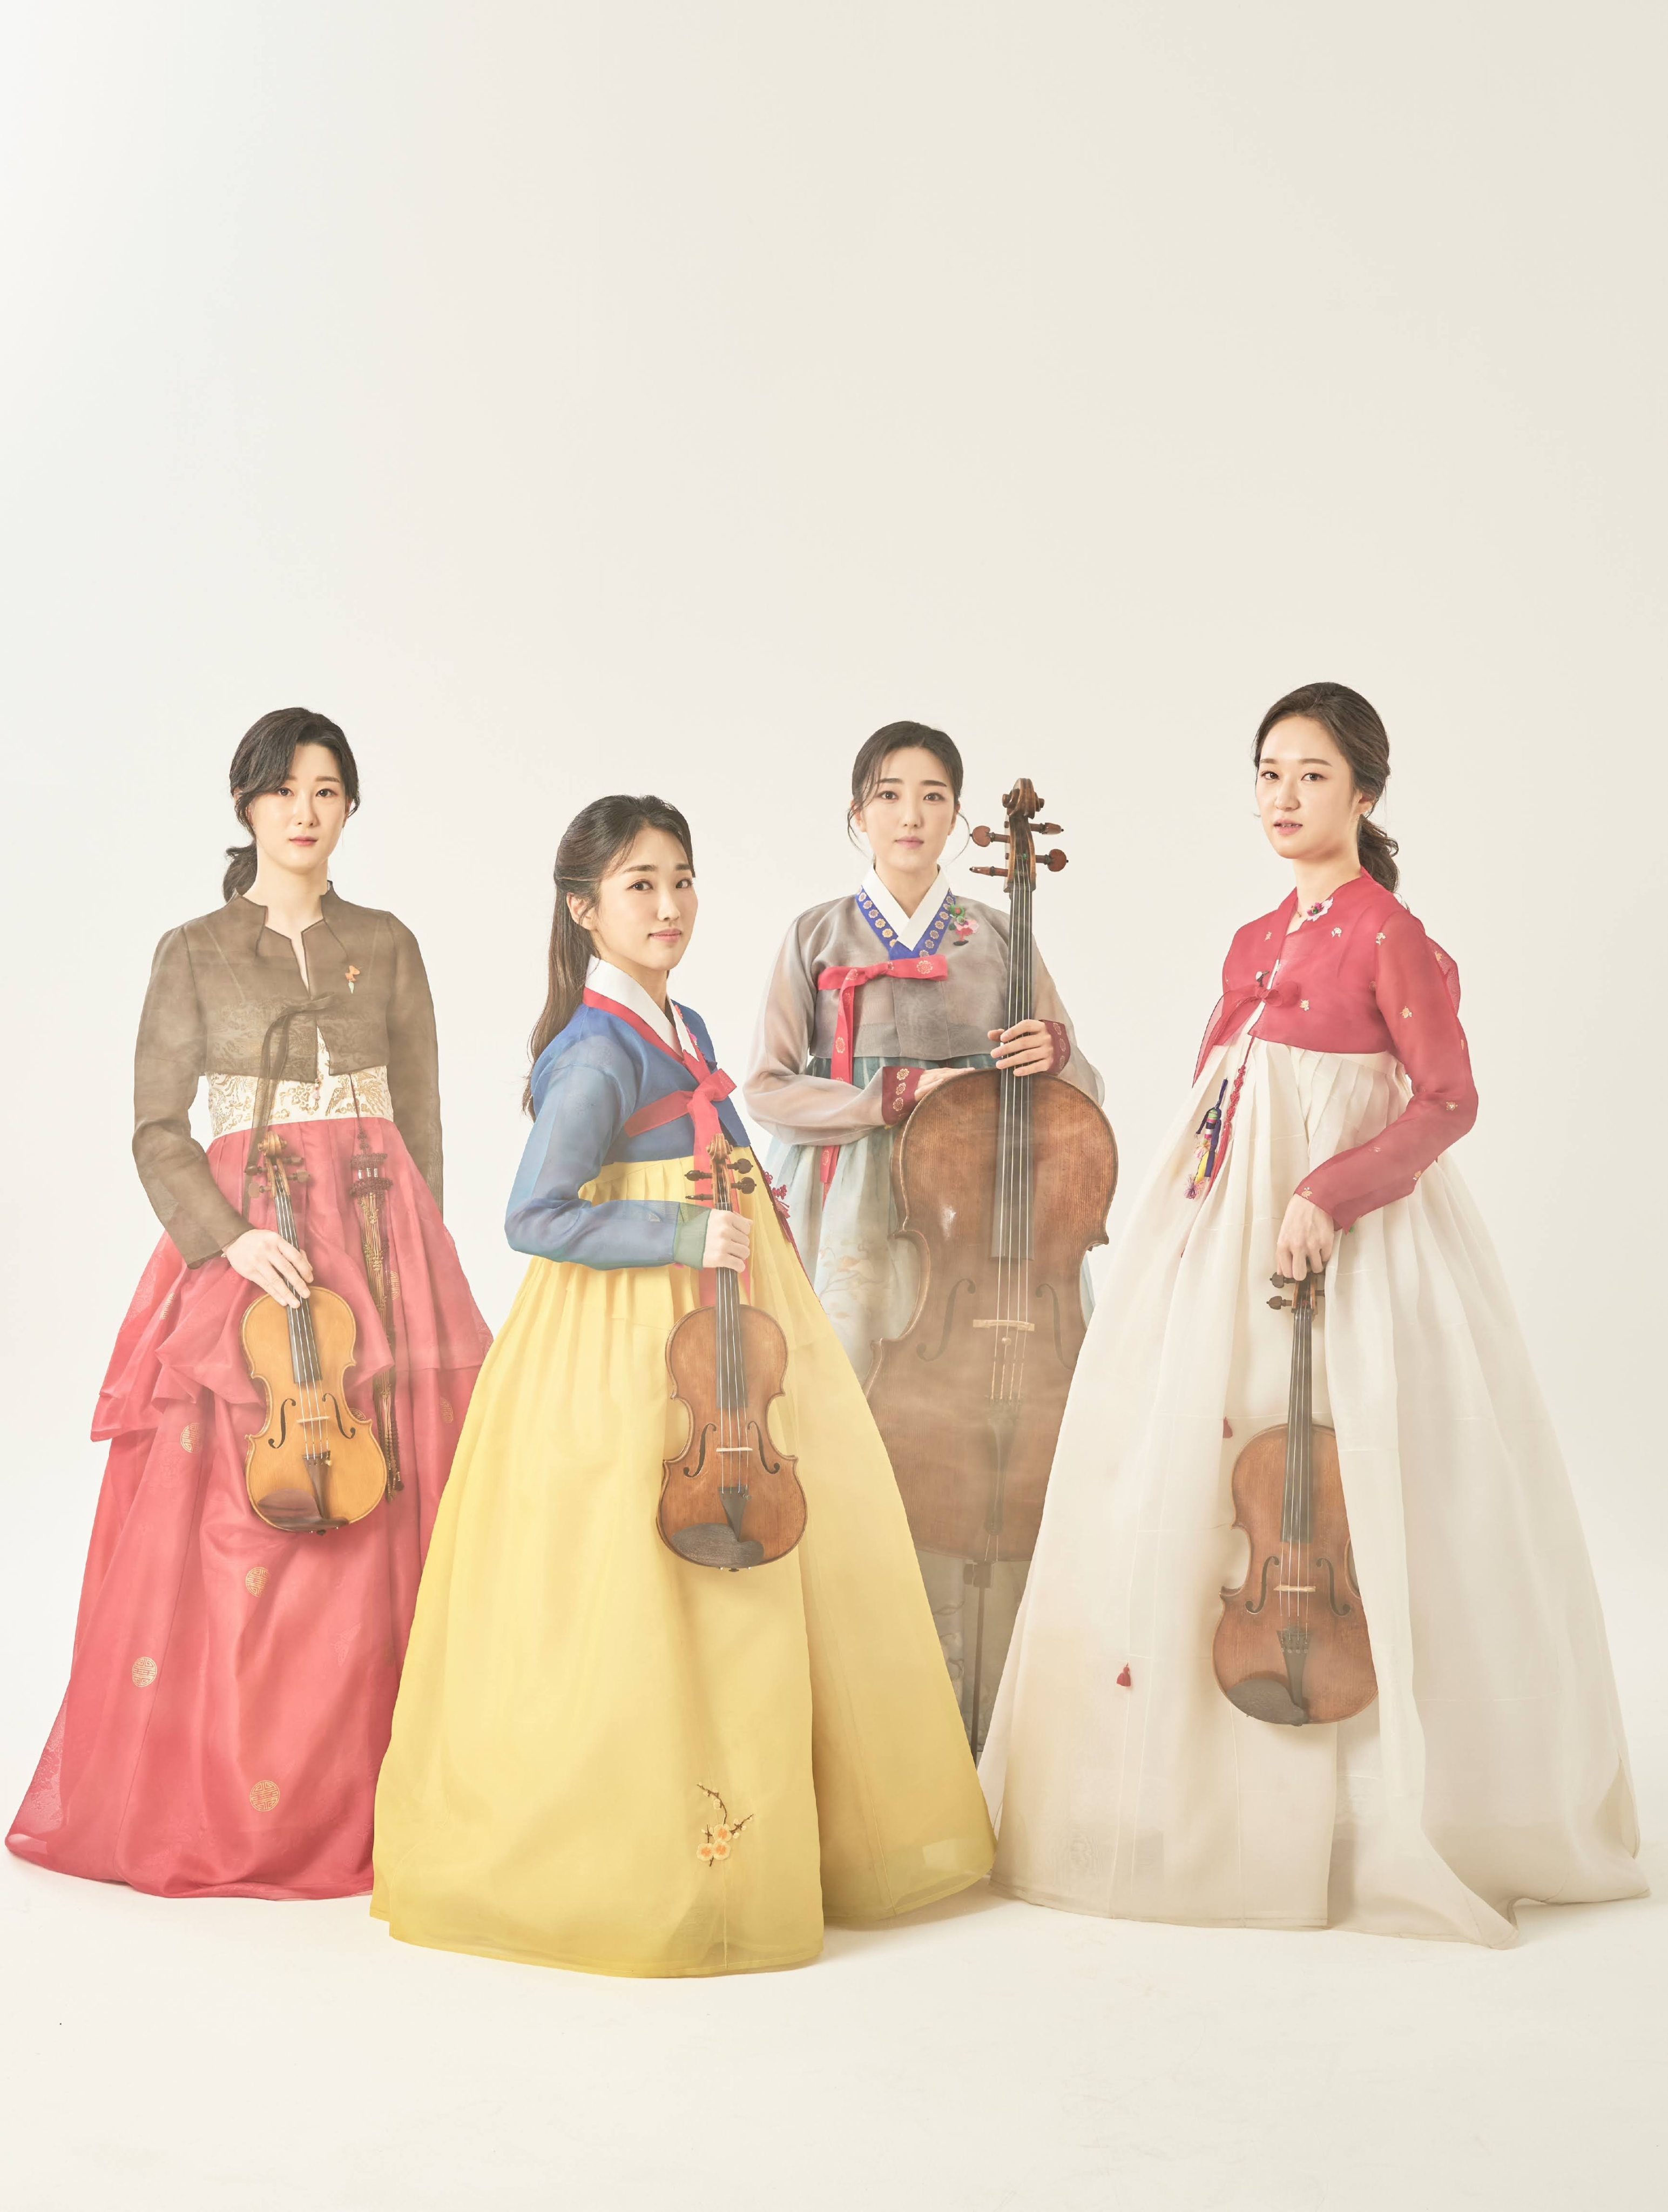 Posed in traditional Korean dress, the Esmé Quartet, comprising four women musicians from South Korea, will make their Hong Kong debut with a string quartet recital on February 28 as part of the 2023 Hong Kong Arts Festival. Photo: Piljoo Hwang